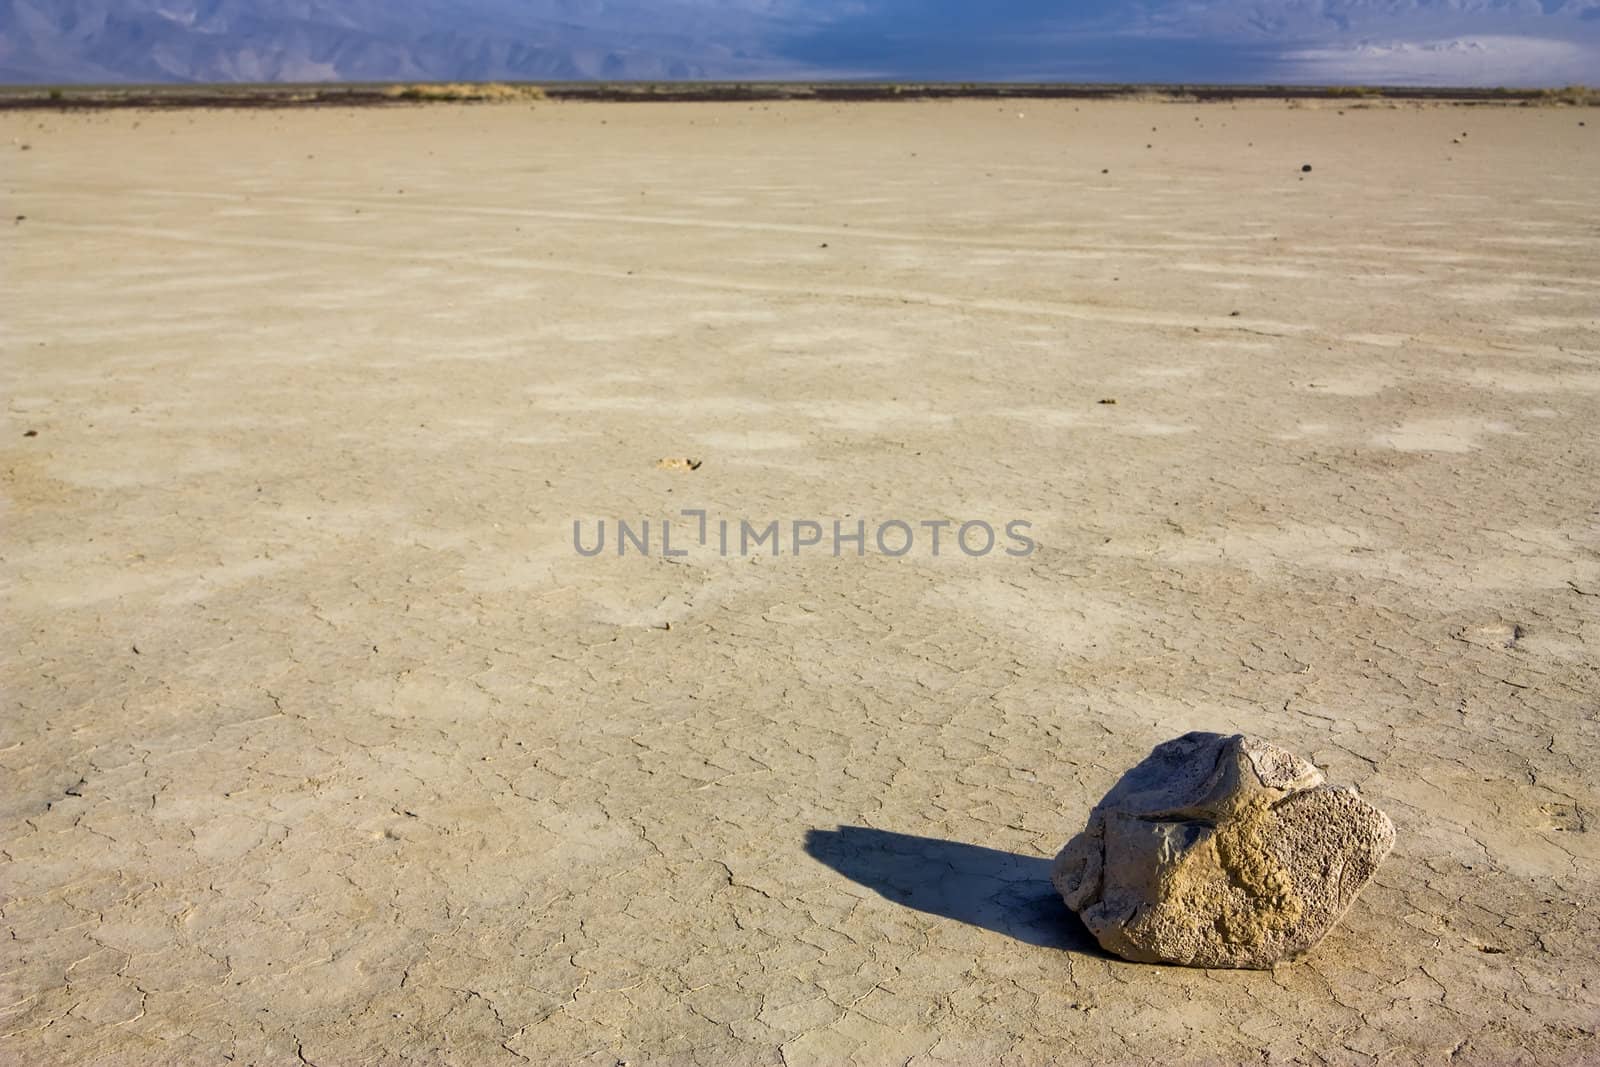 Stone in the desert in the Death Valley national park, California.